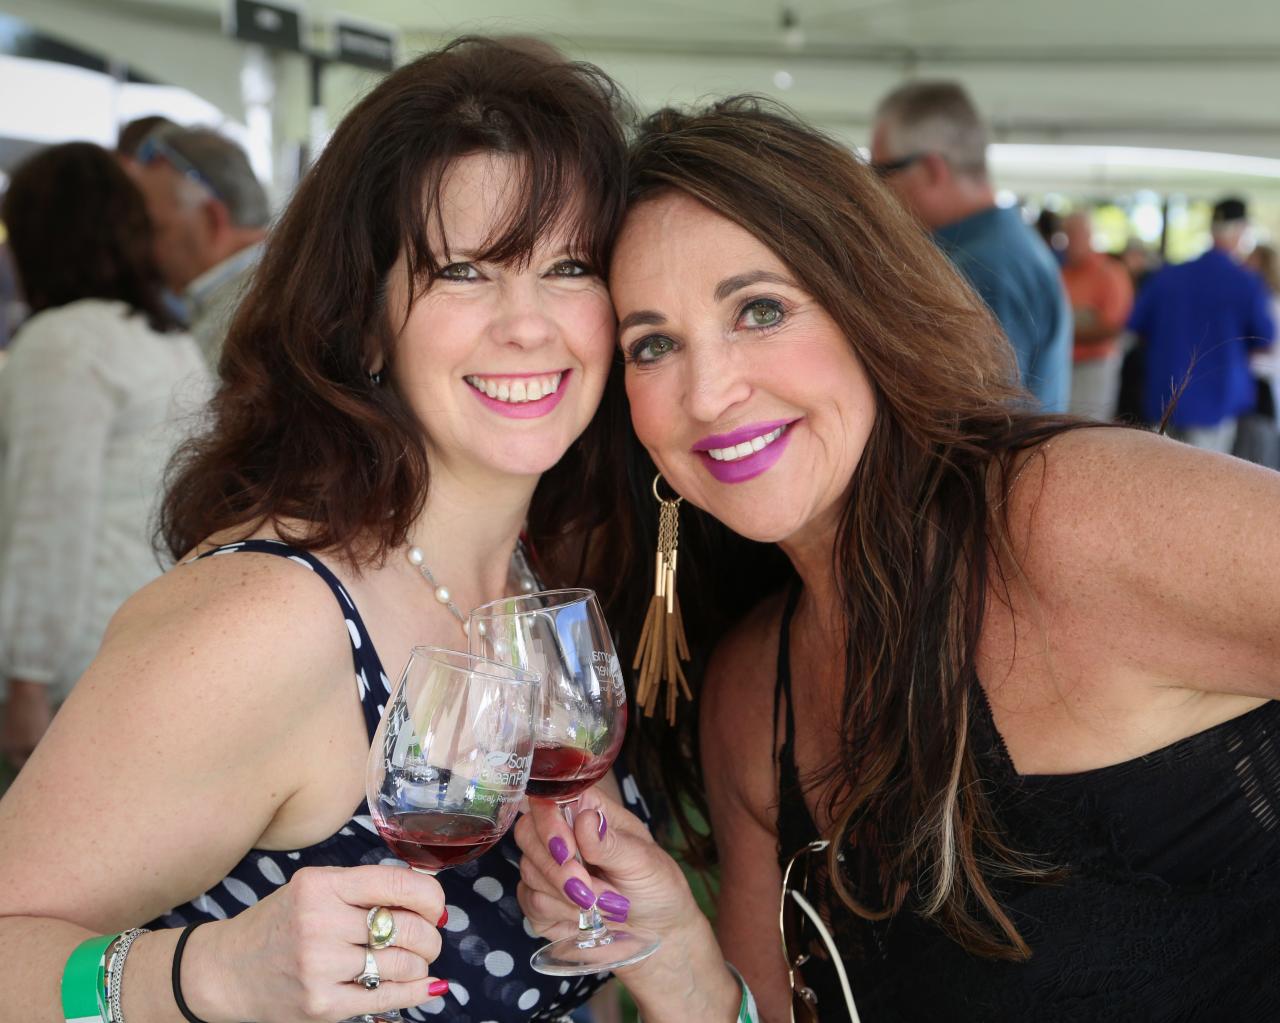 90 award-winning wines will be poured at the North Coast Wine & Food Festival. Where does a wine-lover begin? Here are 15 picks to start with. 